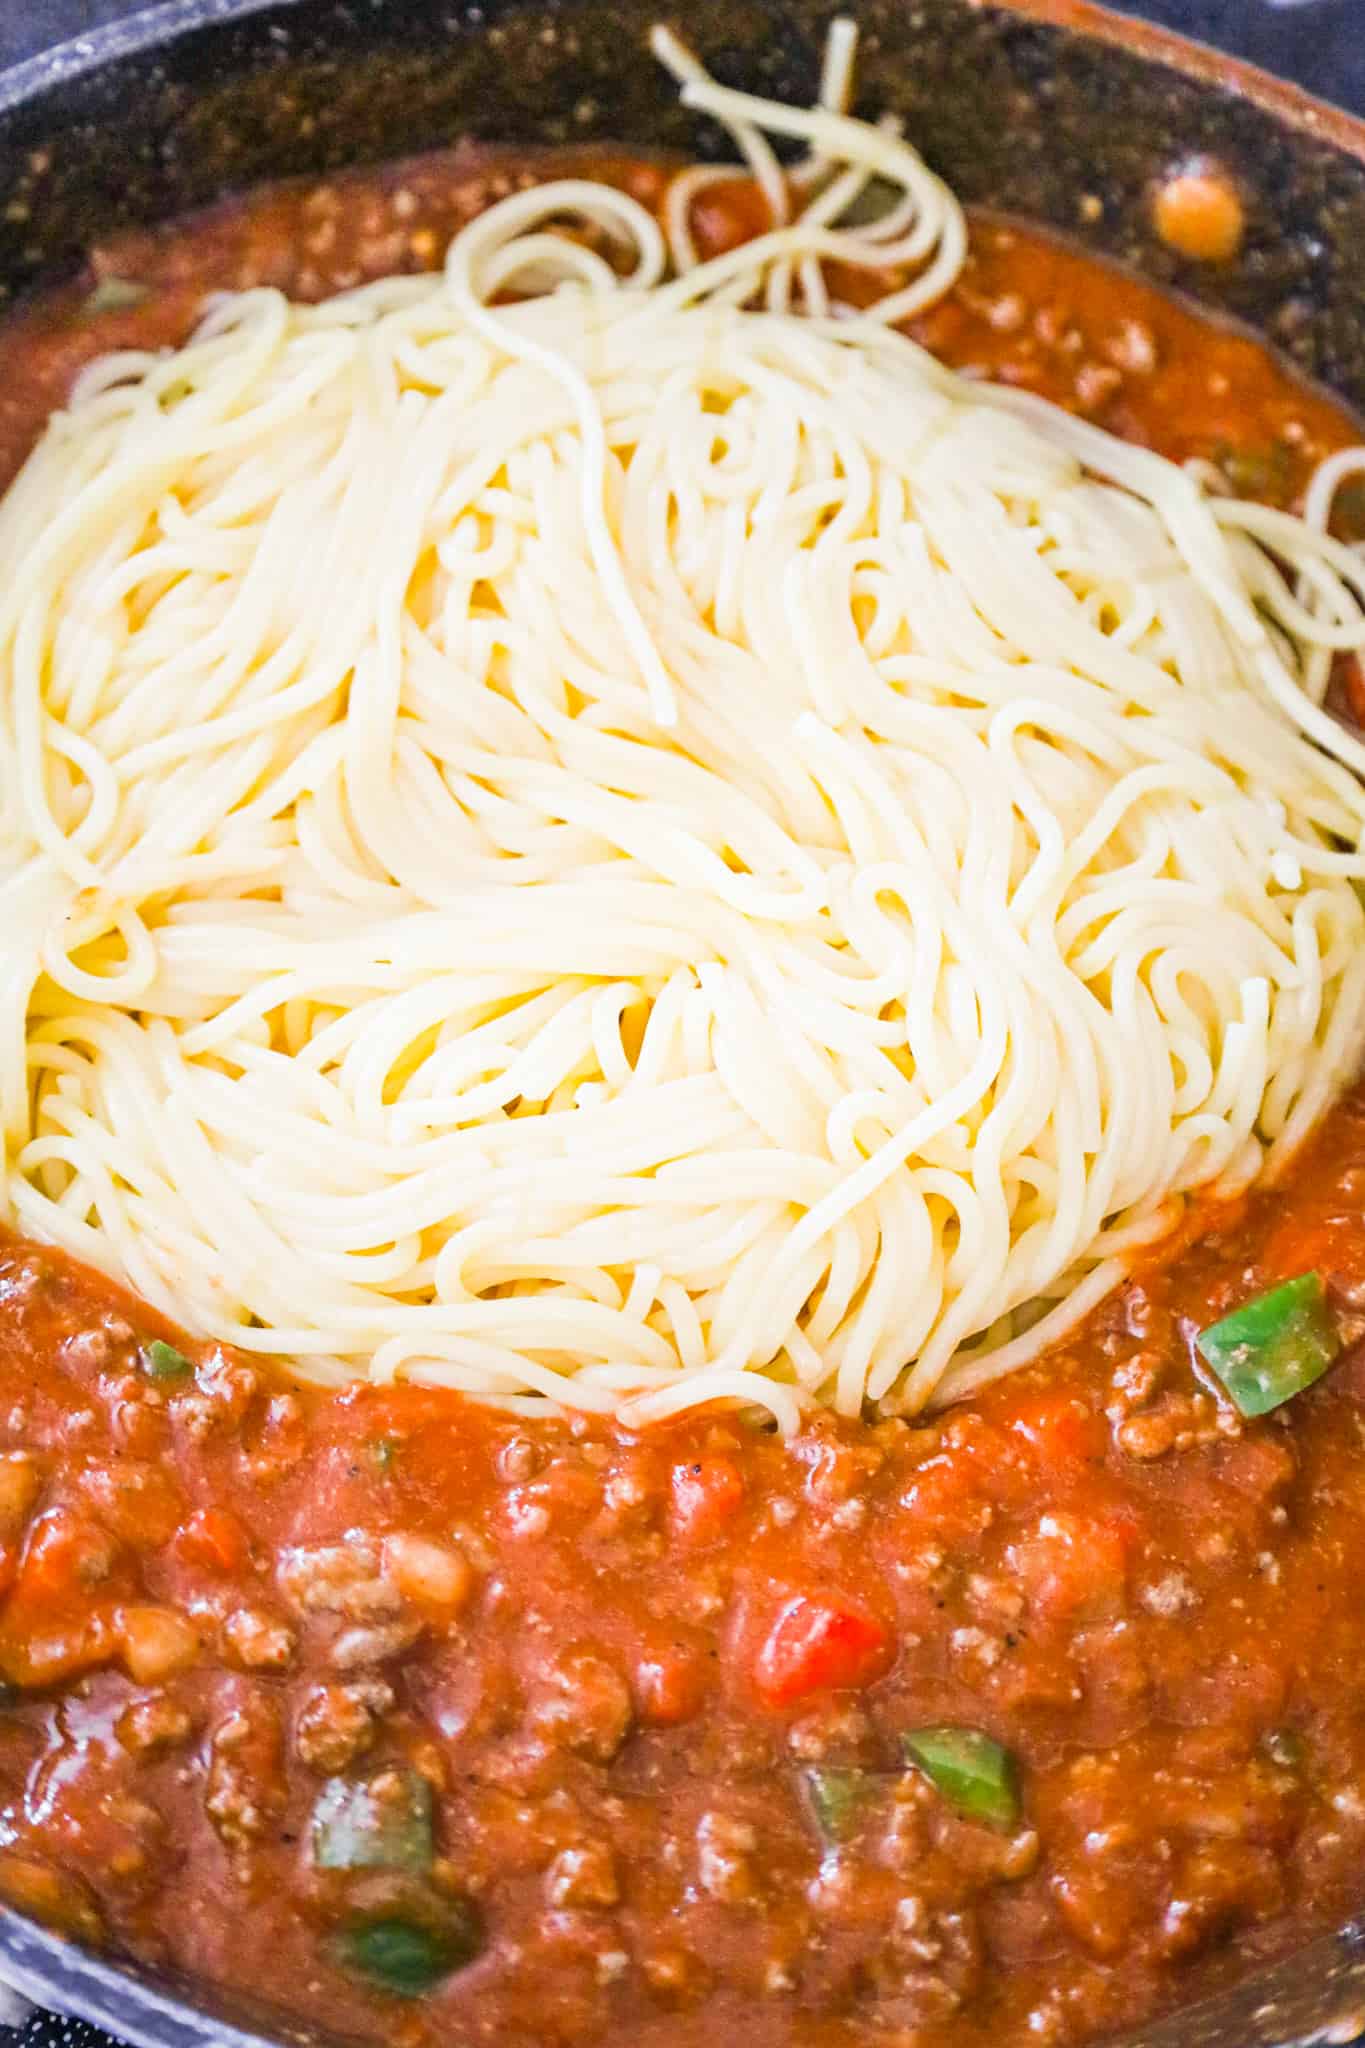 cooked spaghetti added to tomato sauce and ground beef mixture in a saute pan